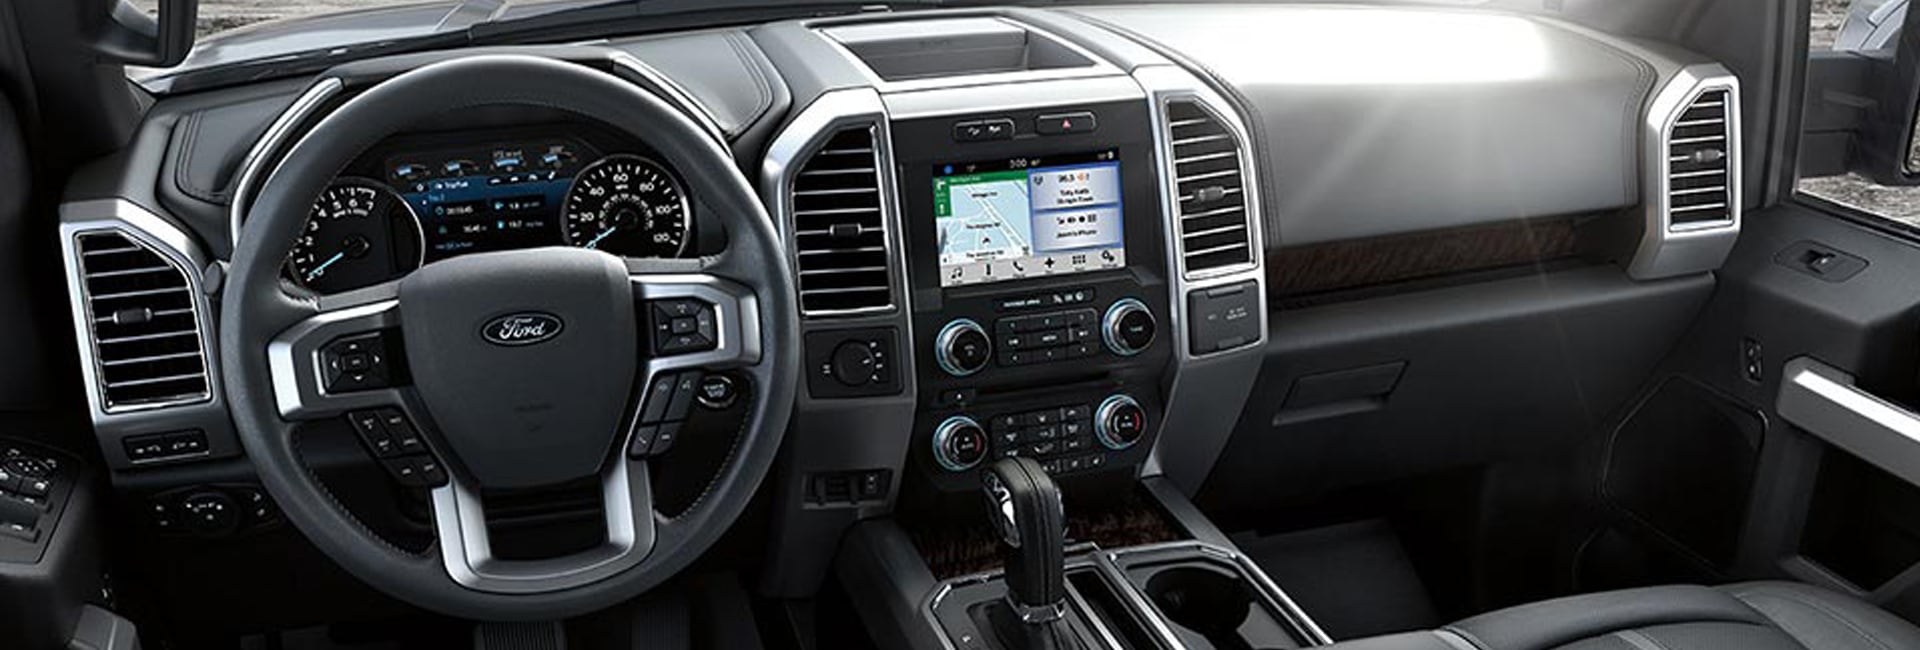 Ford F-150 Interior Vehicle Features